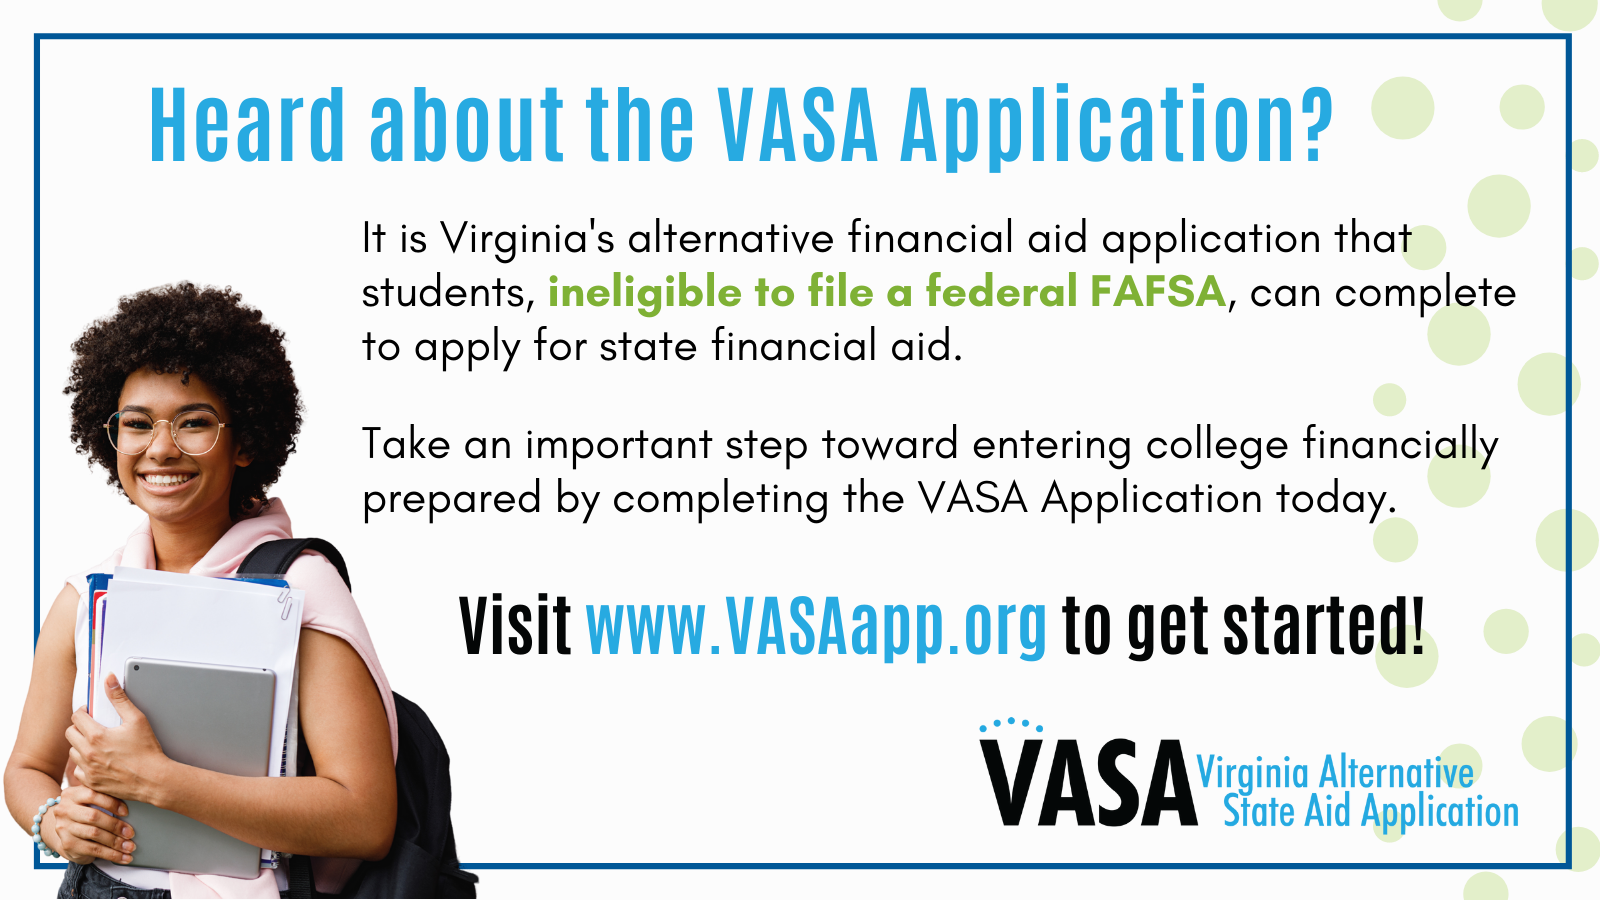 Heard about the VASA Application? Visit www.vasaapp.org to get started or learn more.